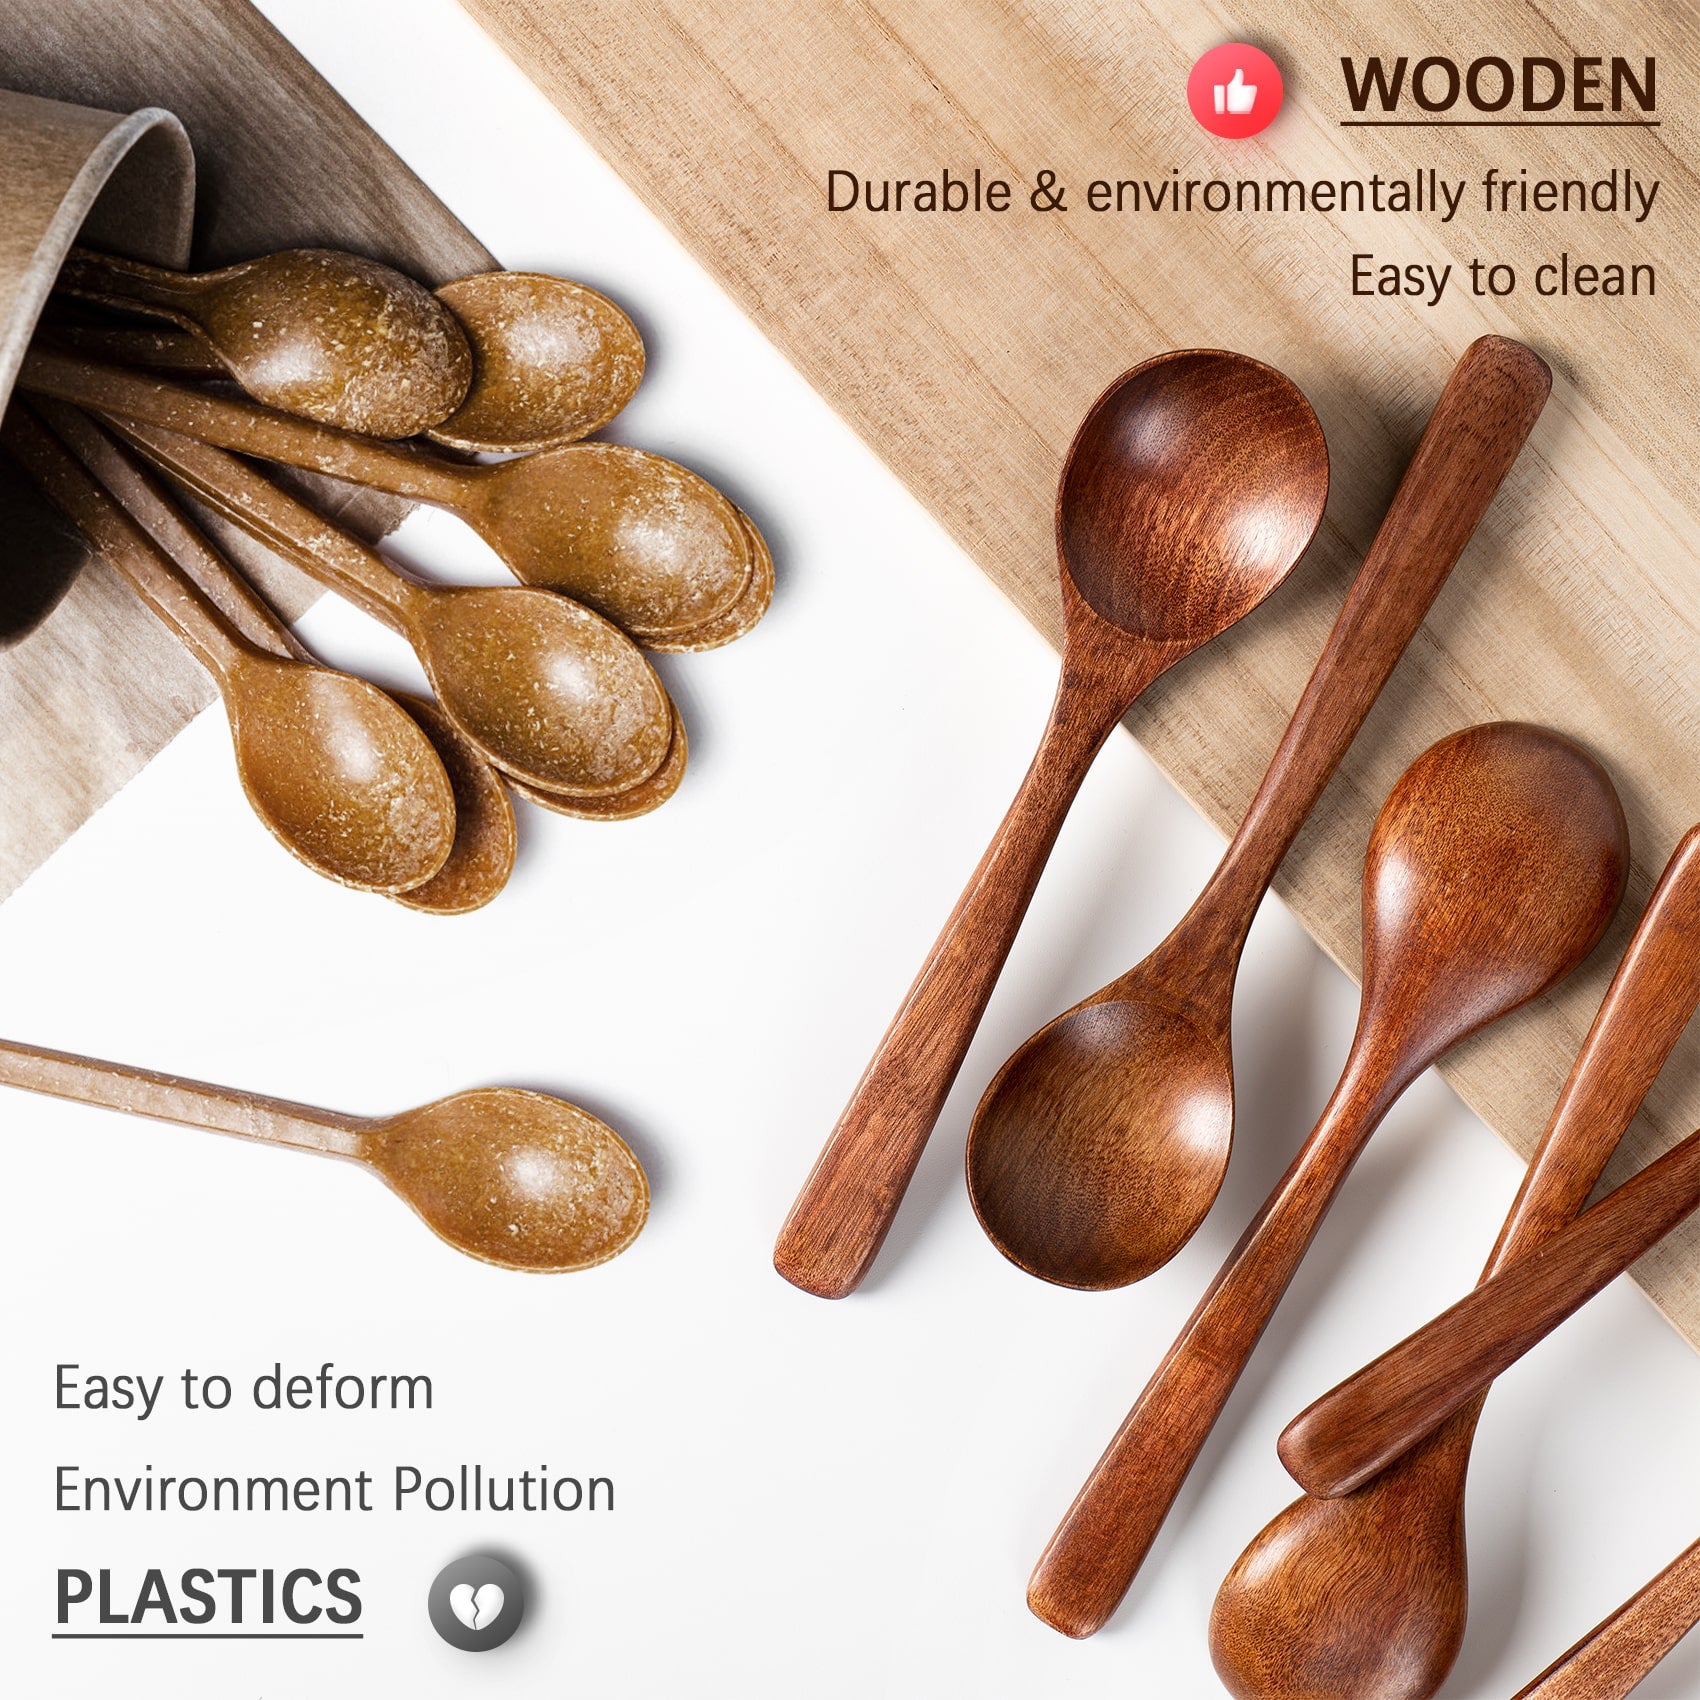 Compared with plastic spoons, small wooden spoons are more environmentally friendly, durable and easy to clean